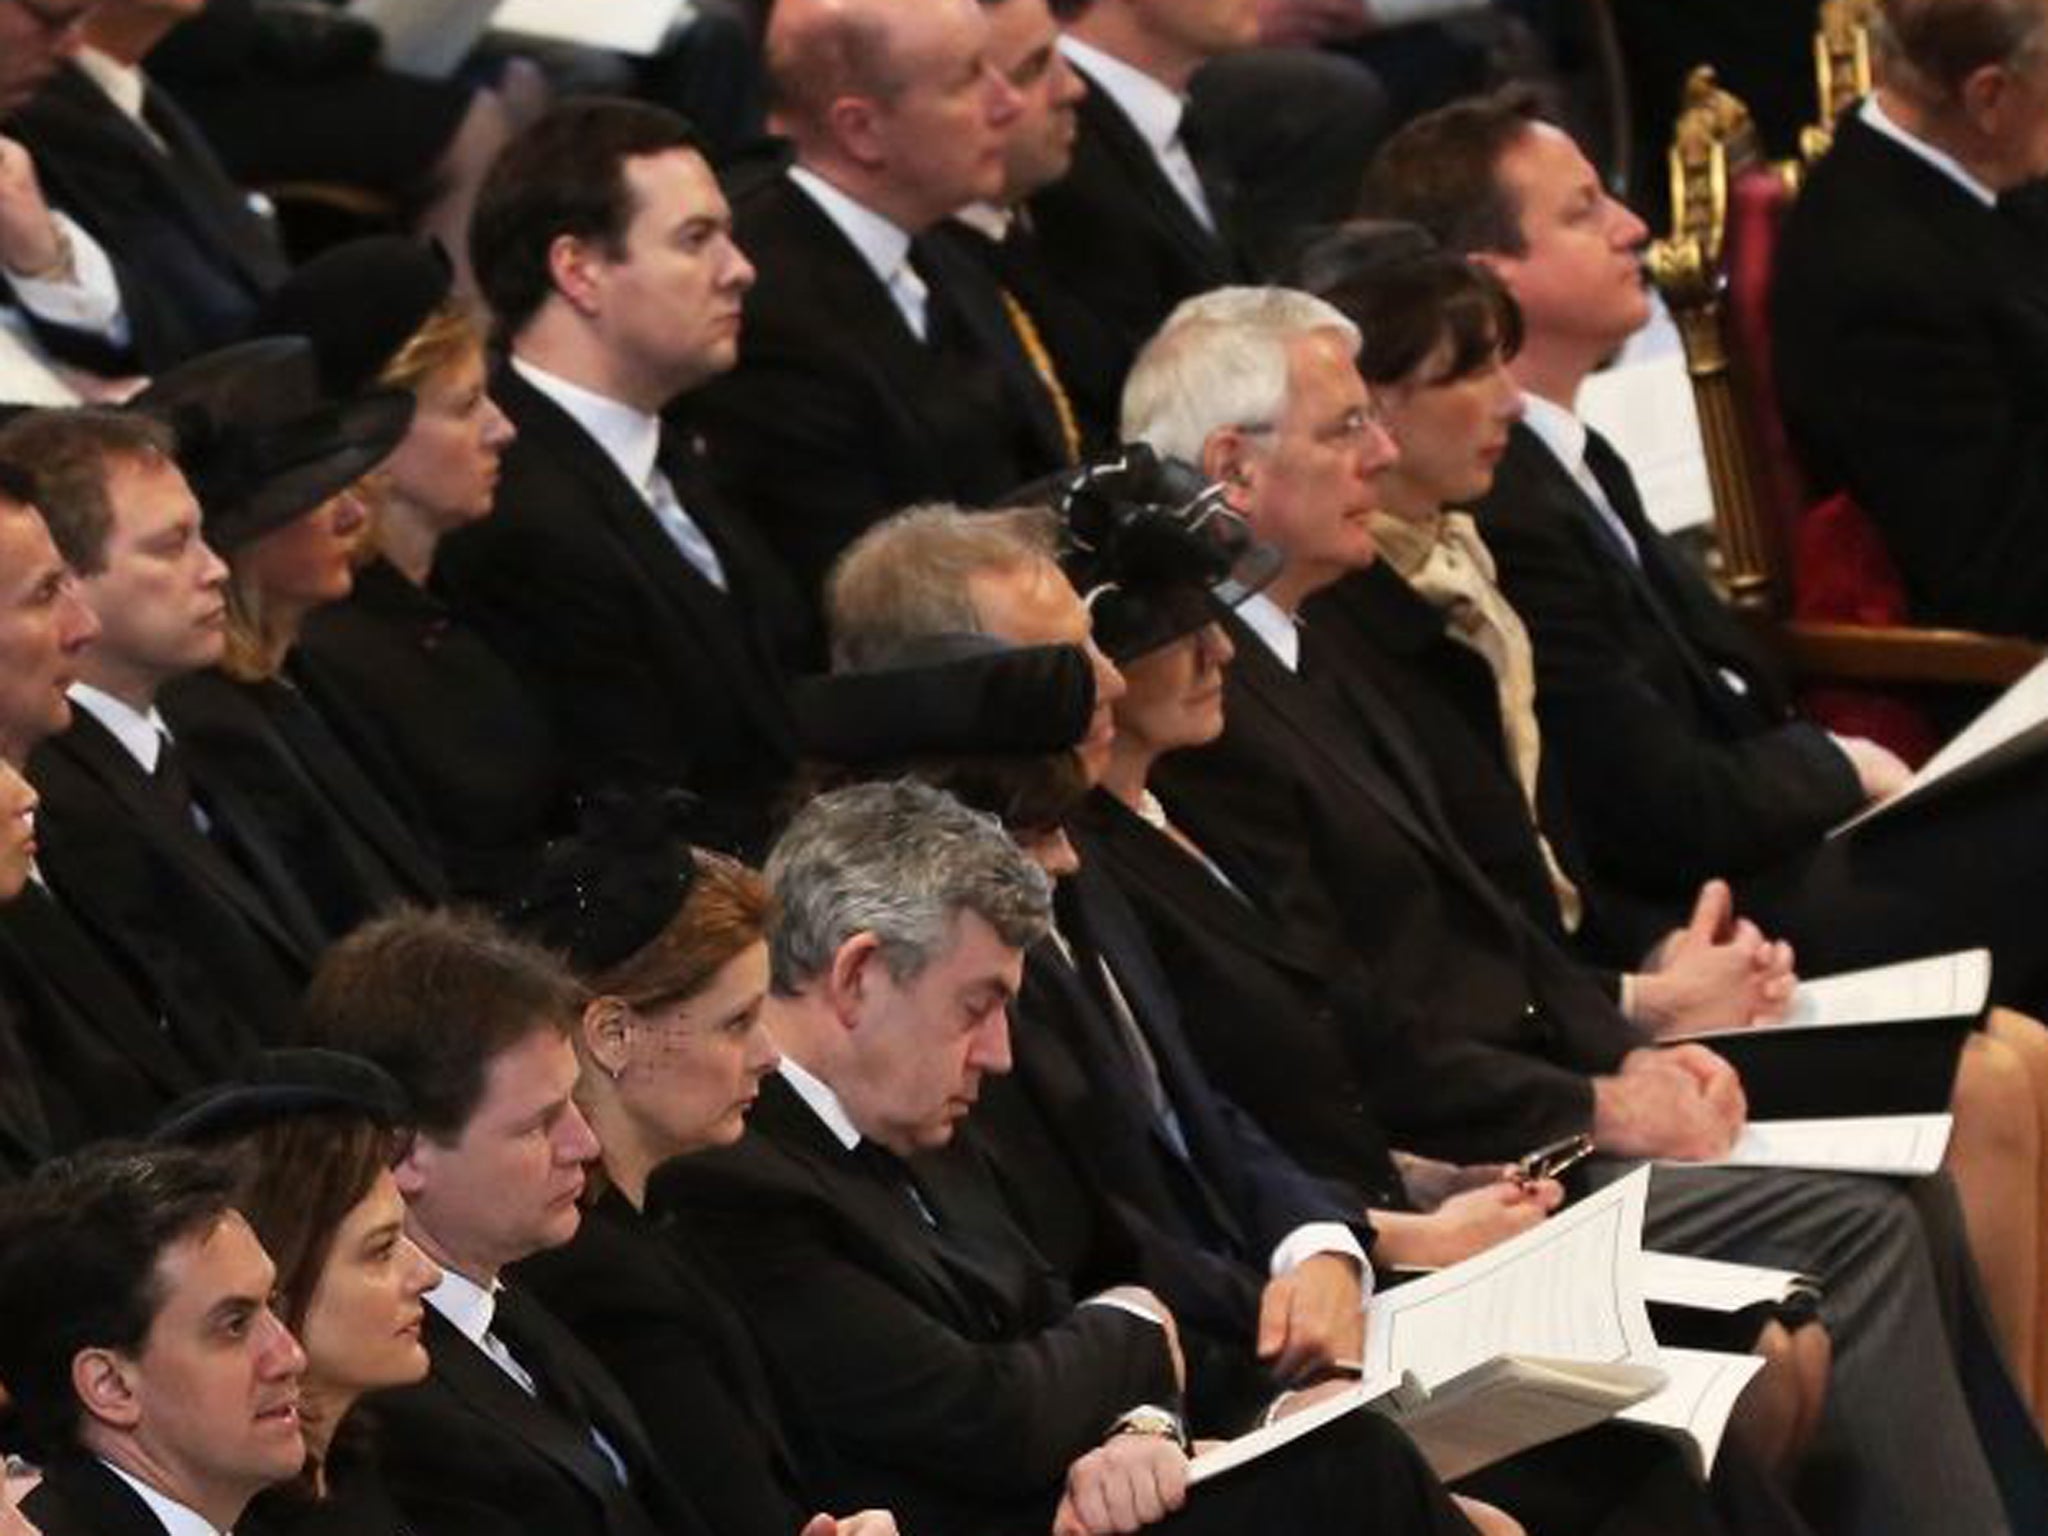 Members of the Cabinet, alongside former Prime Ministers and members of the opposition on the front row at today's service